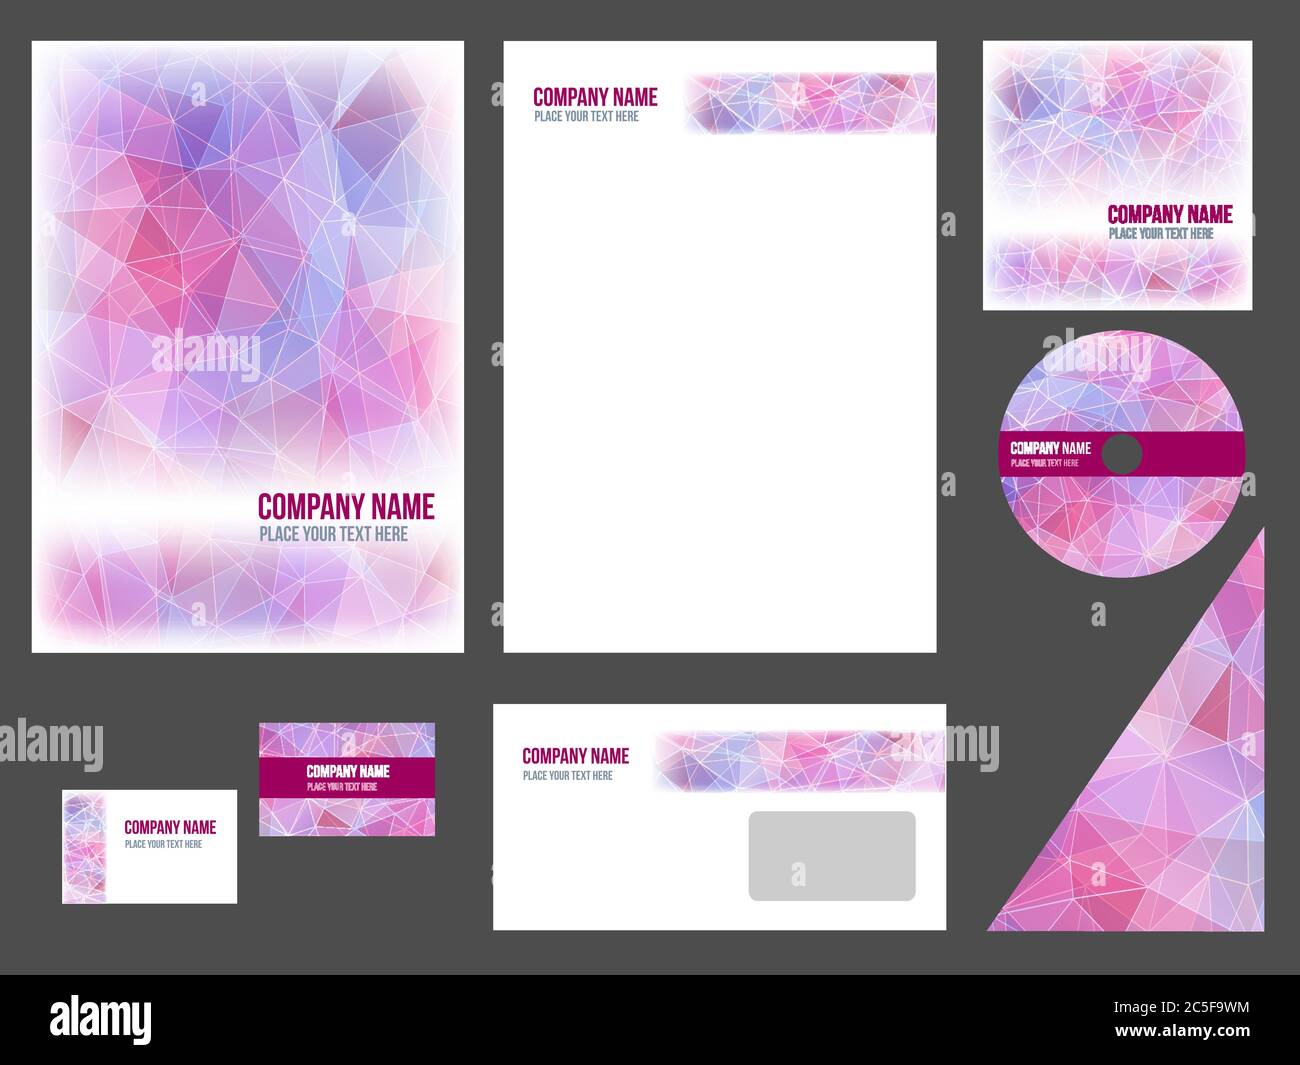 Corporate identity for company or event. Vector template for business stationery. Stock Vector